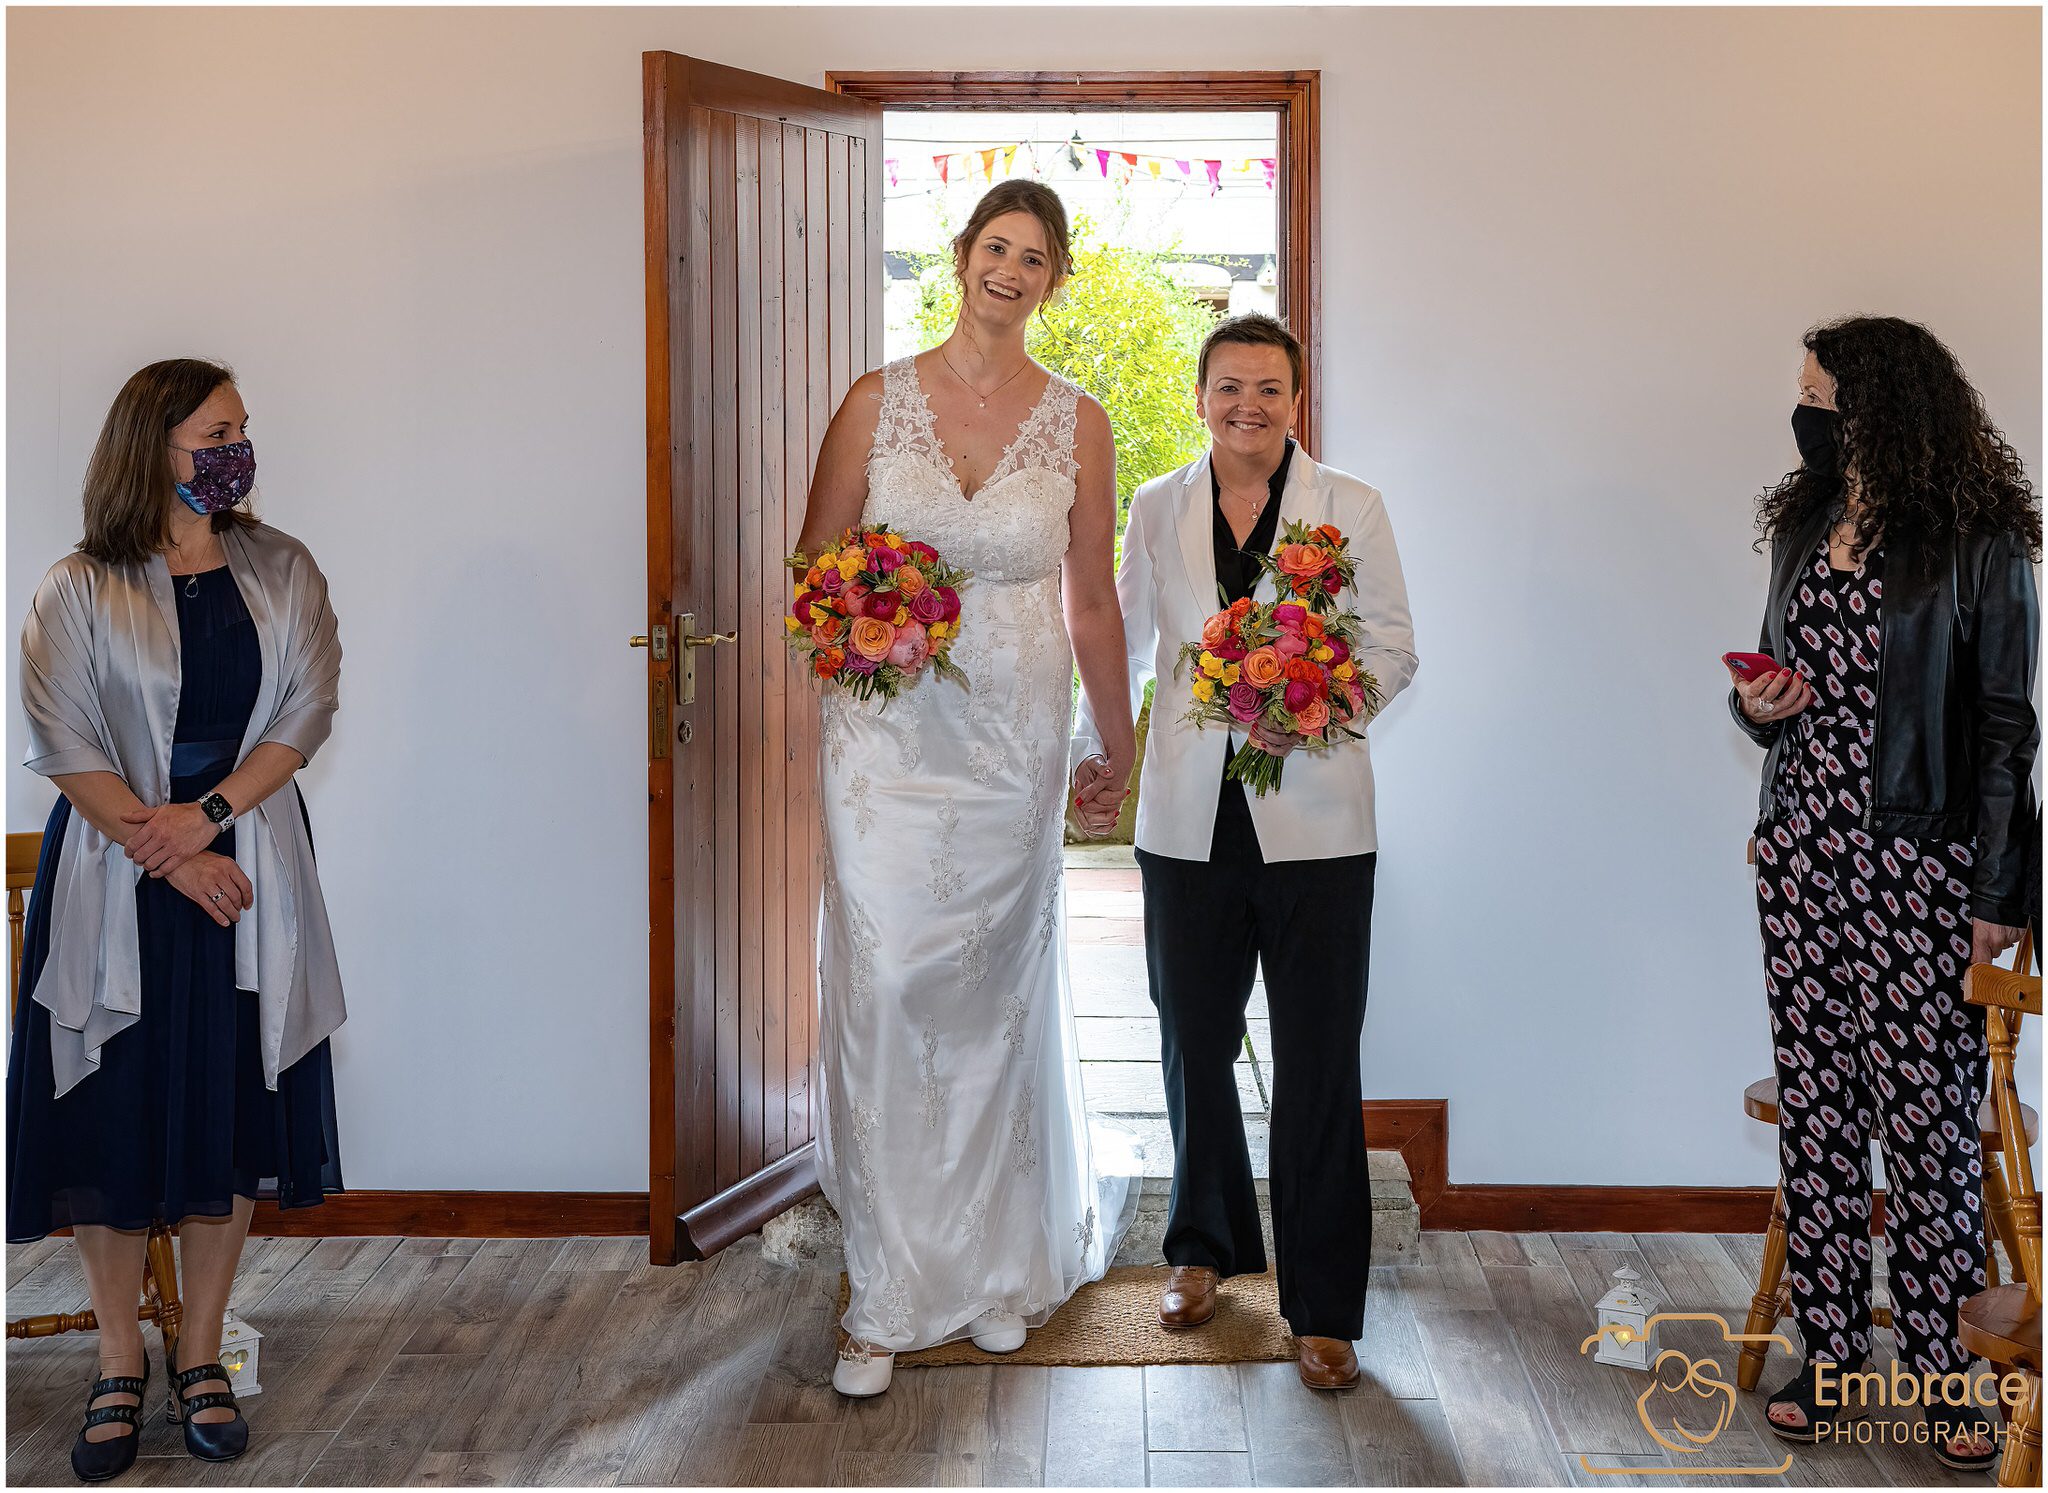 Same sex wedding couple photographed by Embrace Photography at Hall Farm Cottages, Ludham, Norfolk